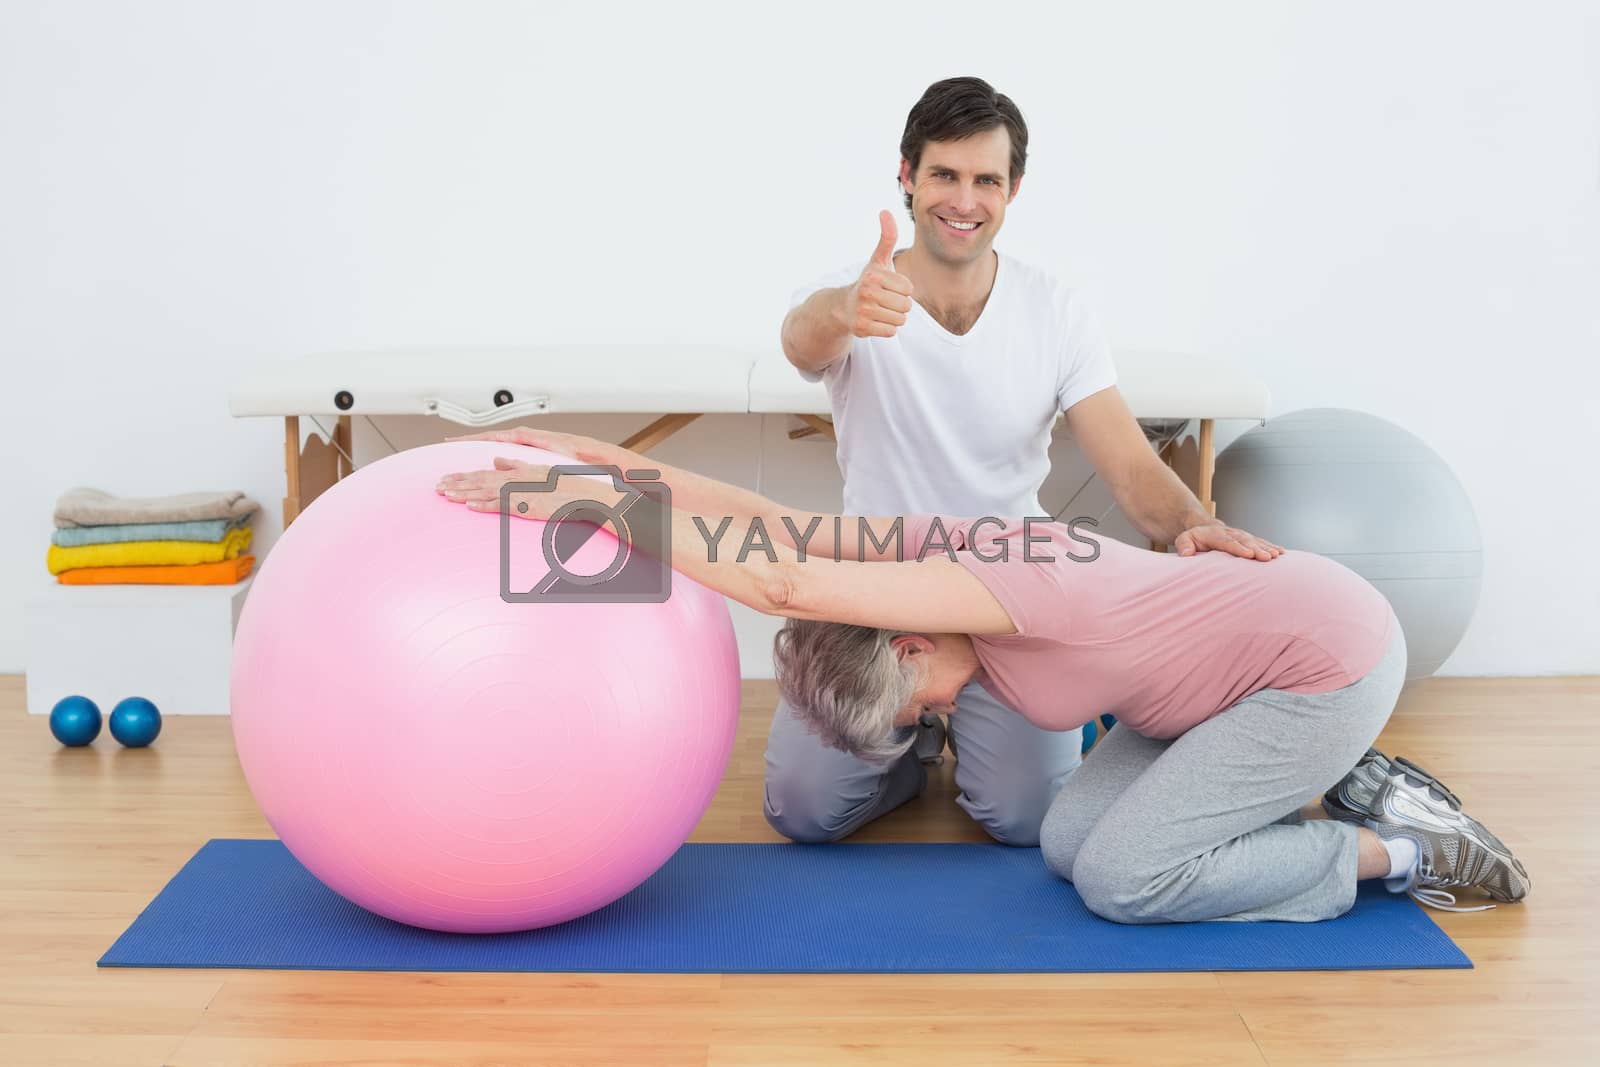 Royalty free image of Therapist gesturing thumbs up by senior woman with yoga ball by Wavebreakmedia